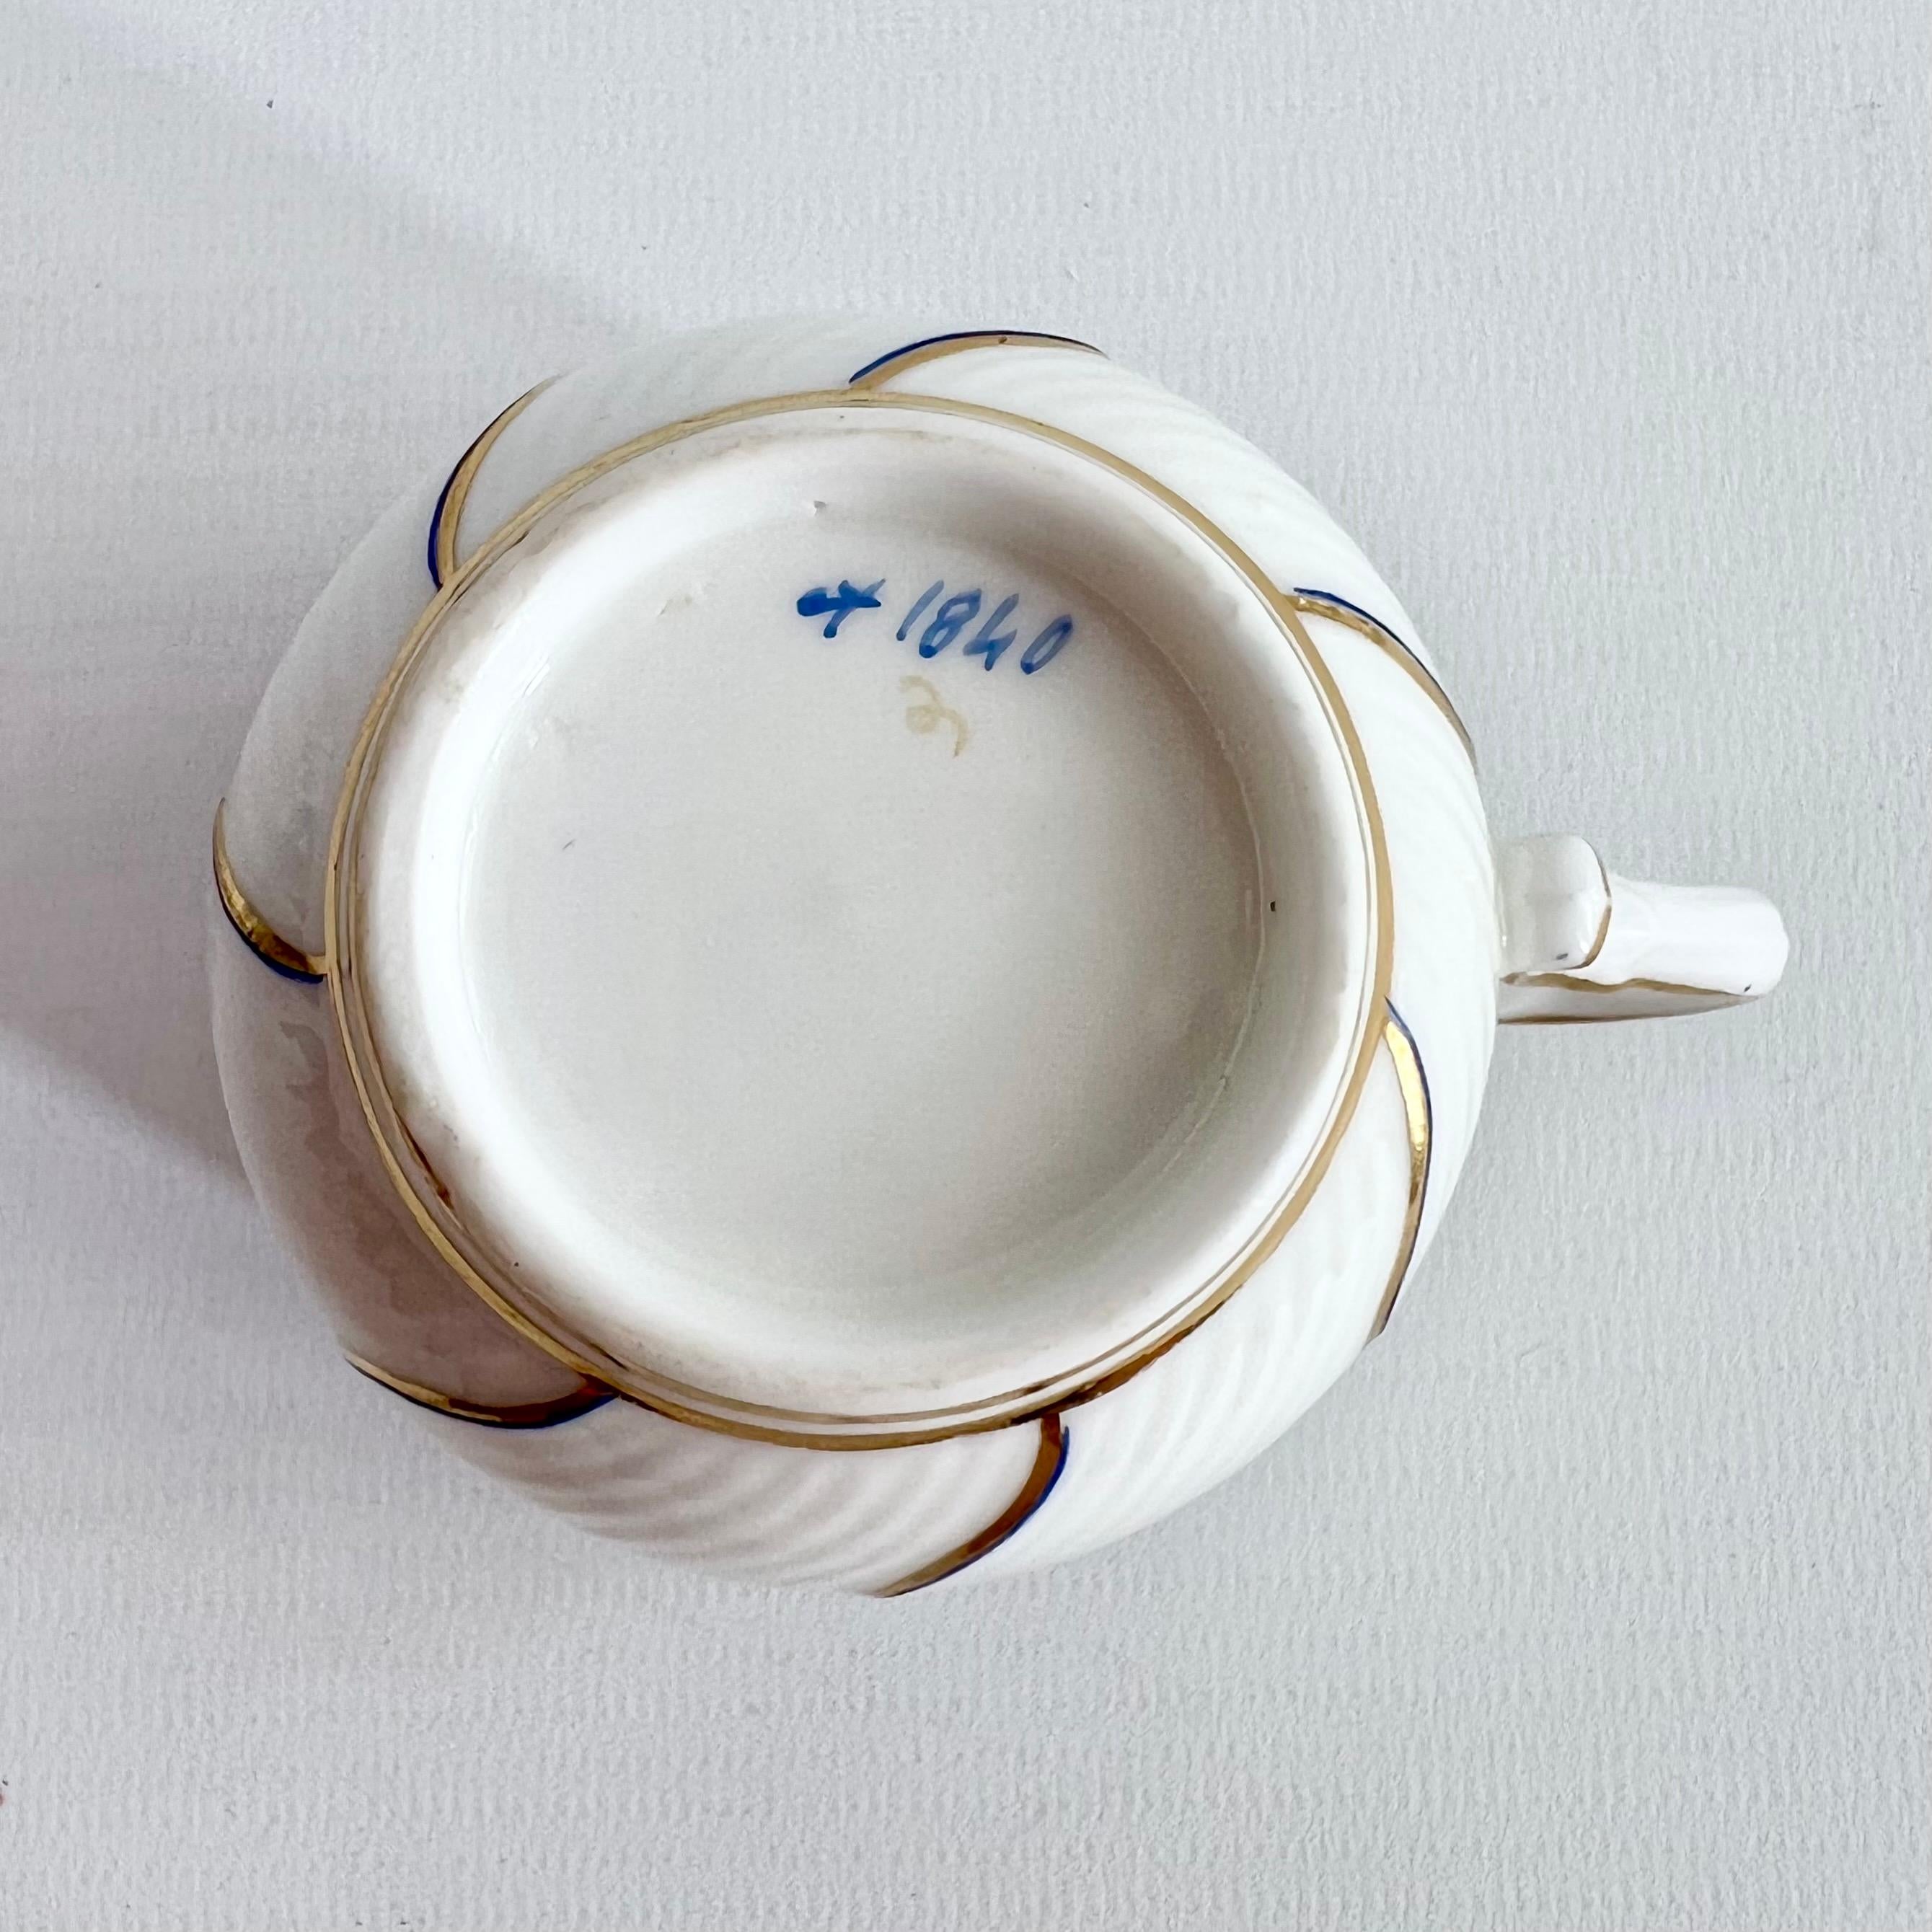 Minton Orphaned Coffee Cup, Spiral Fluted with Blue and Gilt, Victorian ca 1881 4